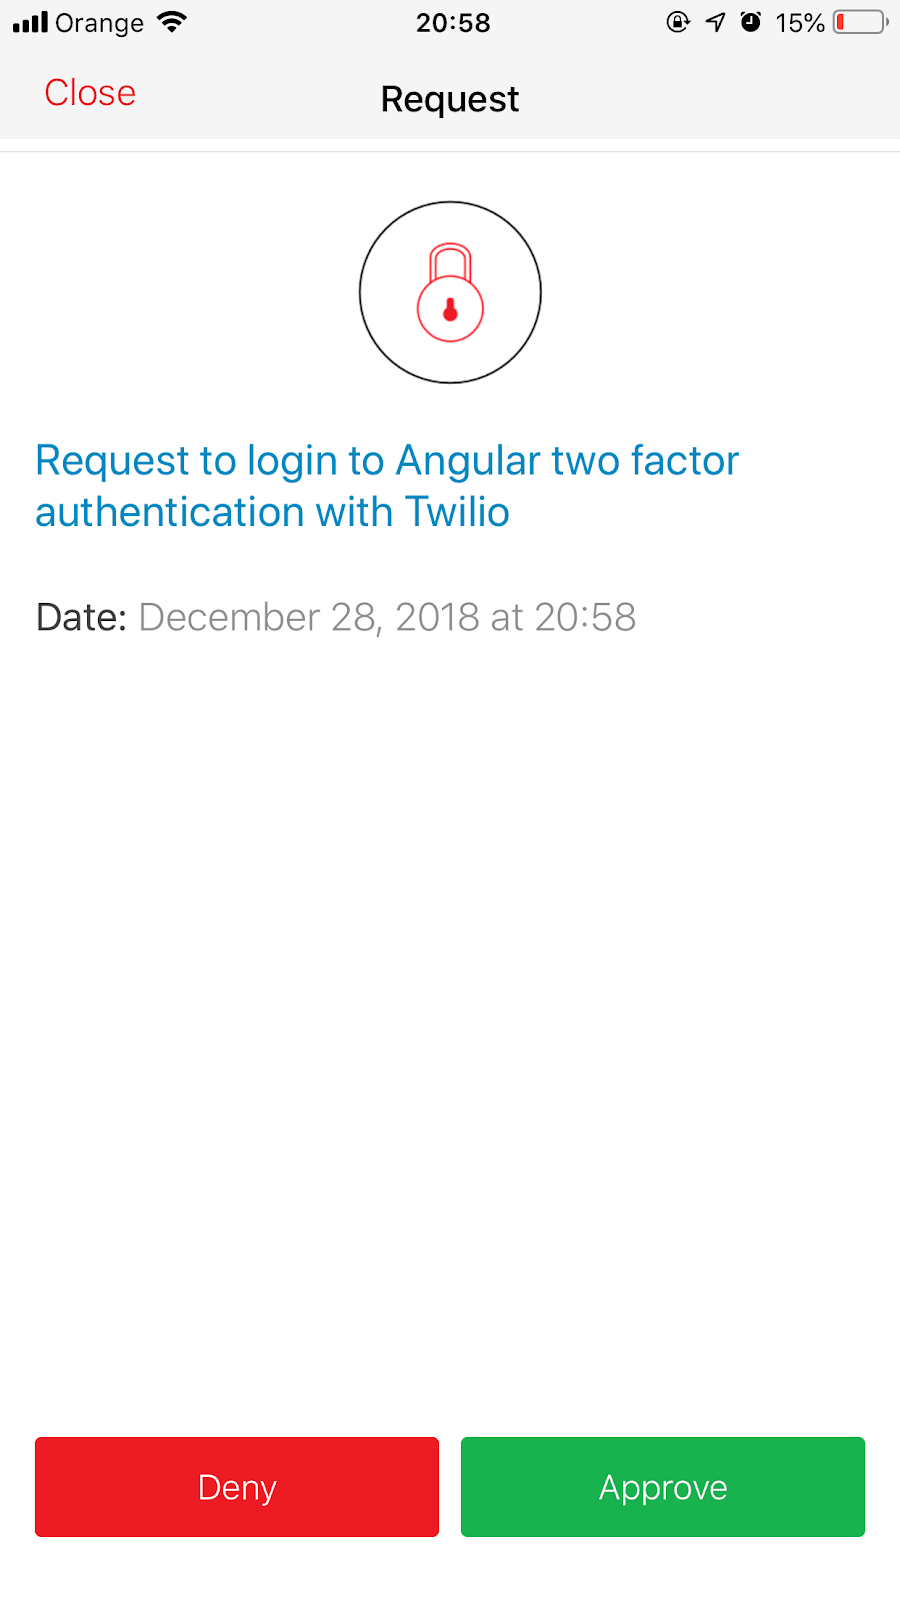 Demonstration of Authy login request with Deny & Approve